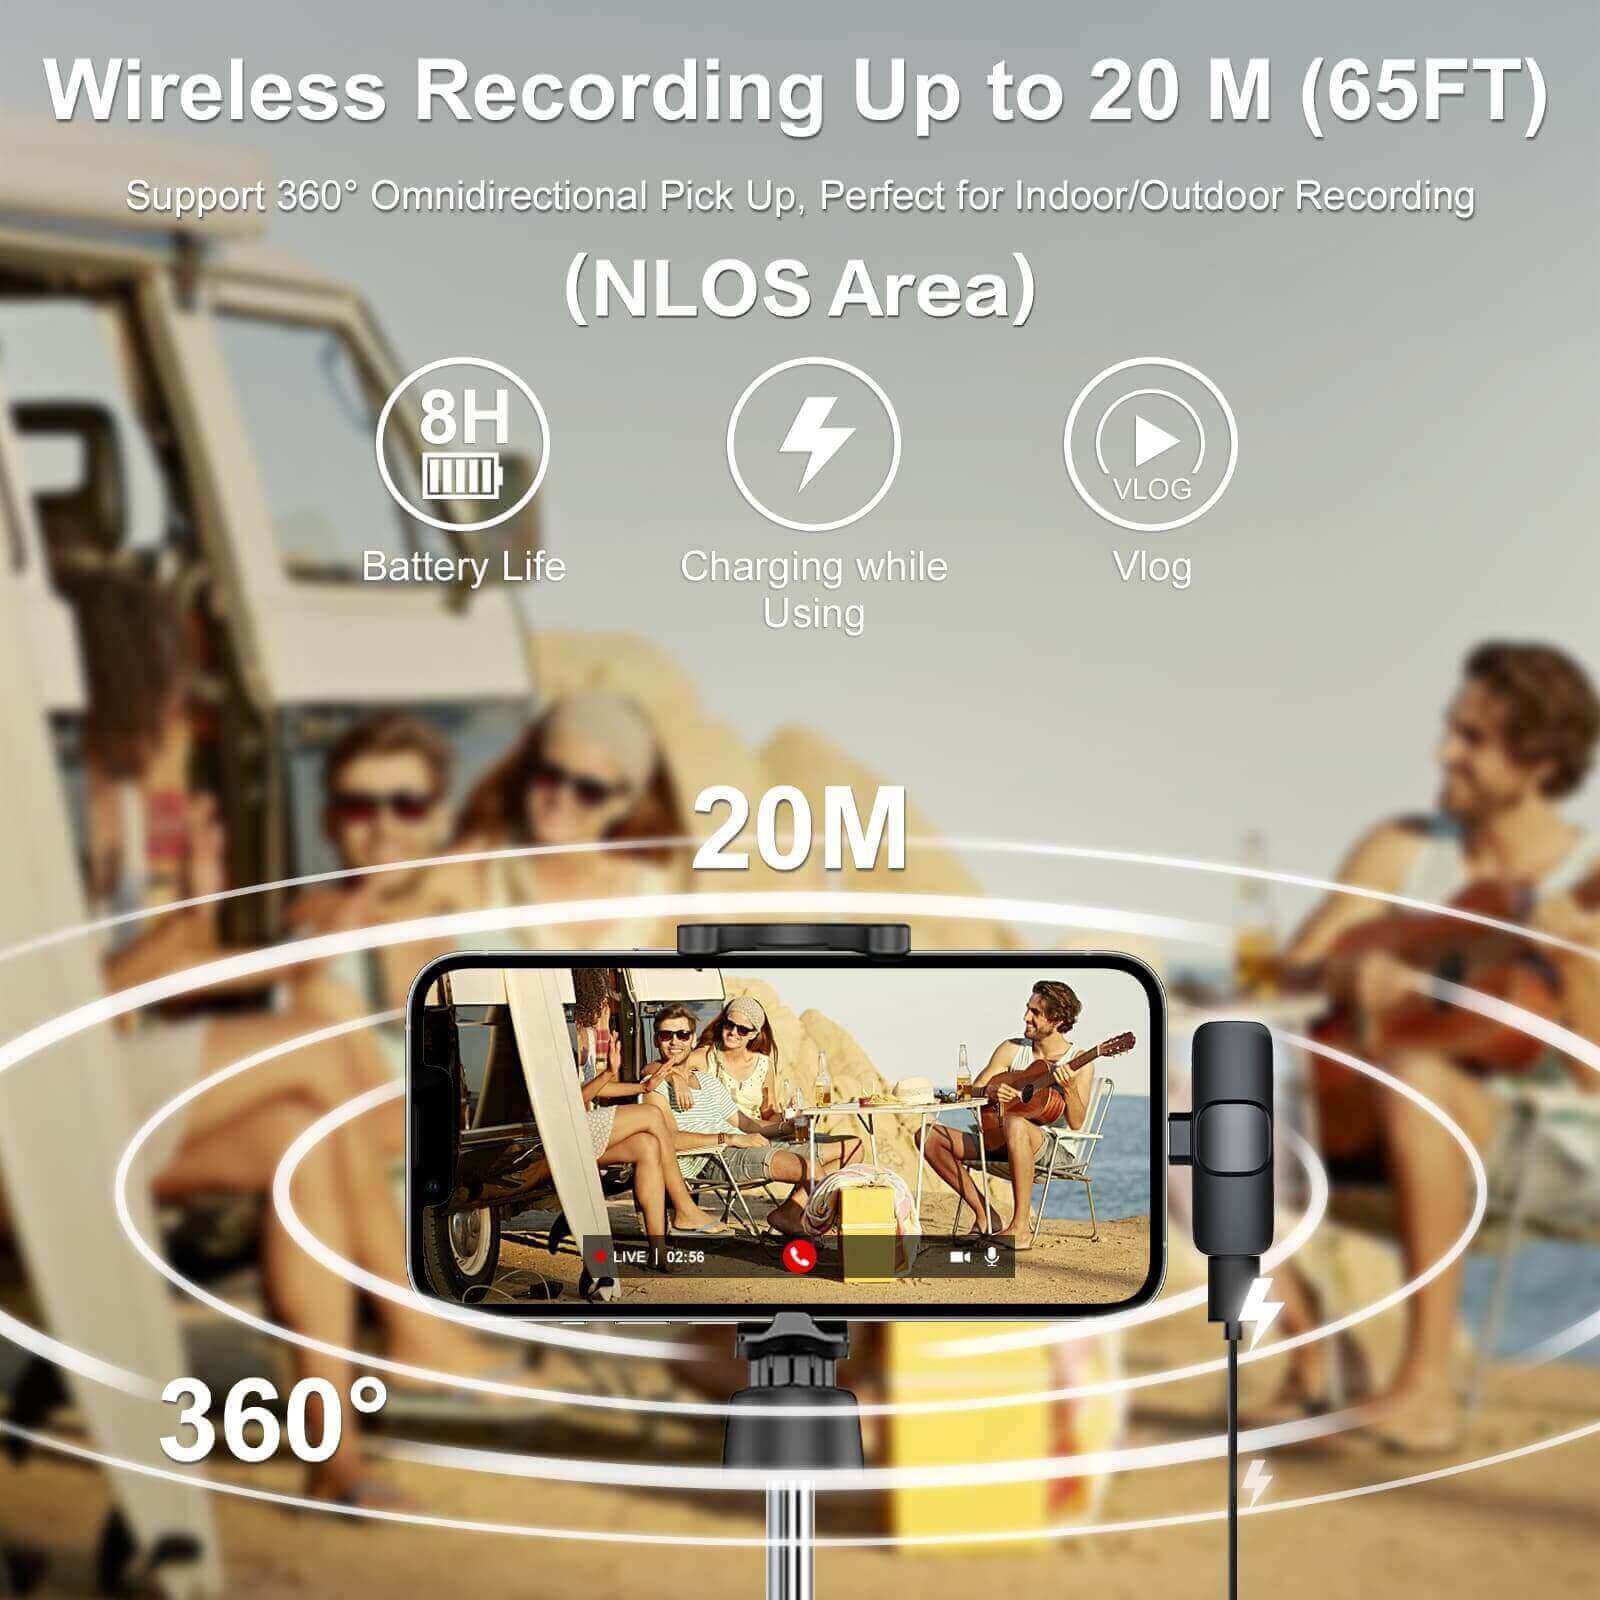 Moman CP1(C) external wireless mic for Android phone with wireless recording up to 20 meters / 65 feet (NLOS)